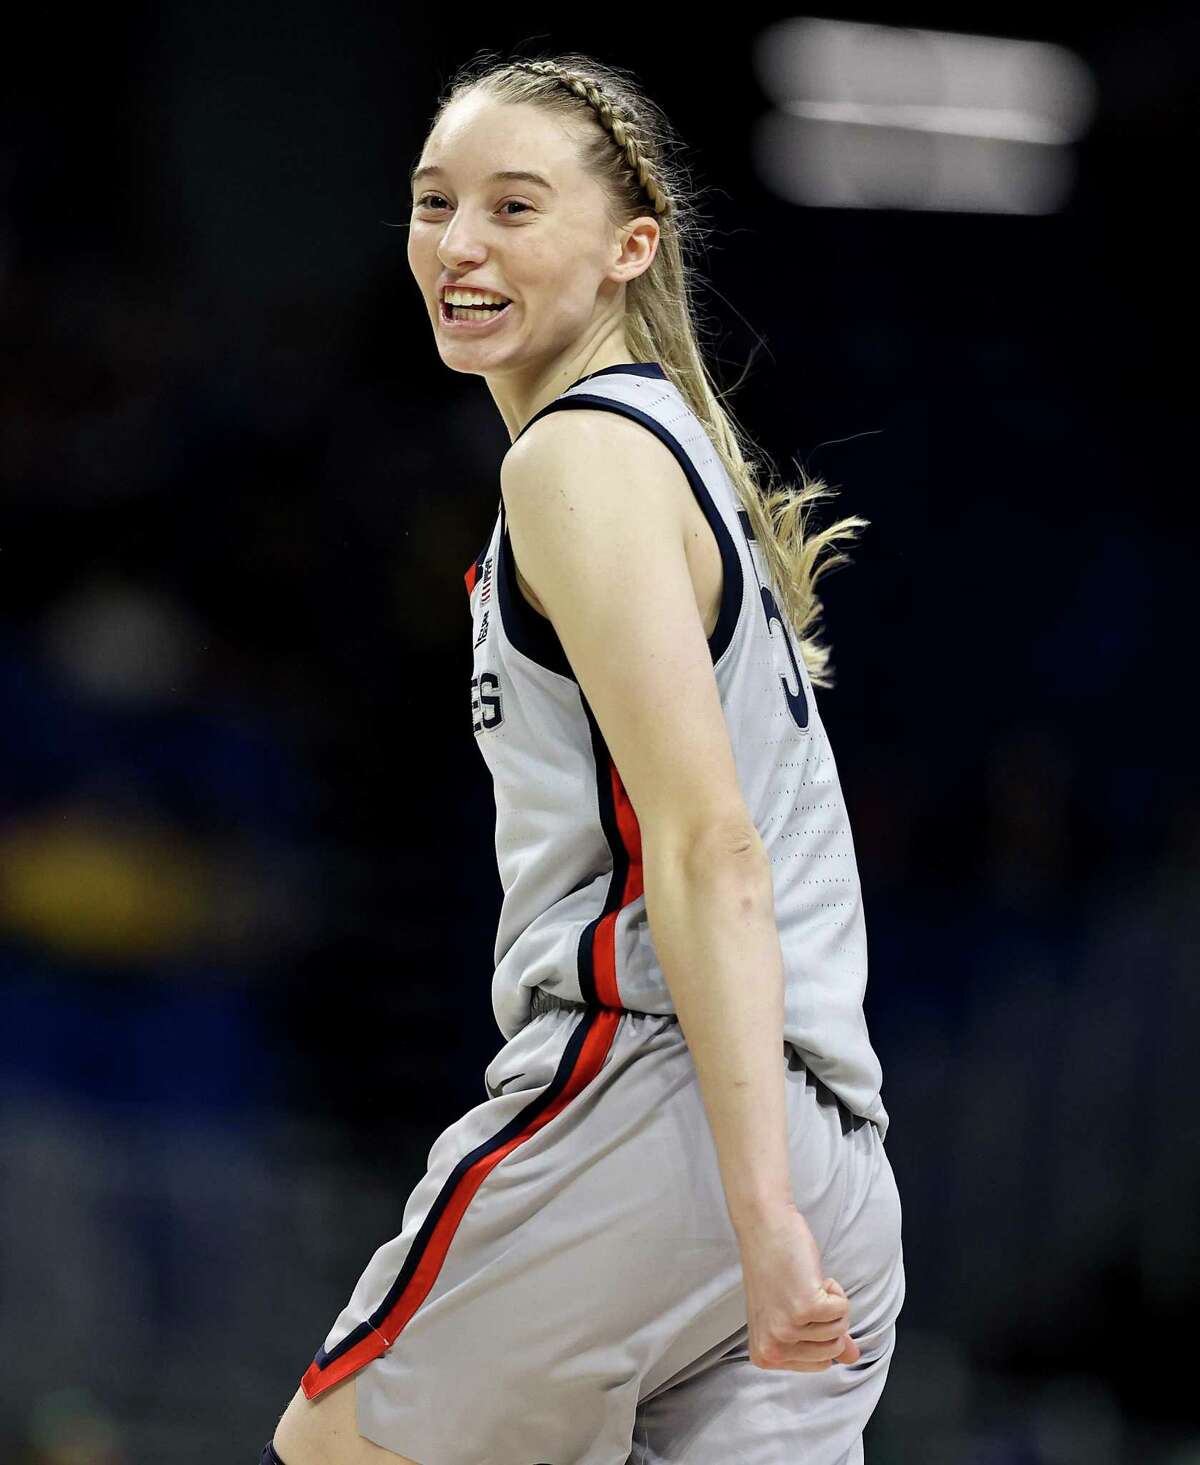 SAN ANTONIO, TEXAS - MARCH 29: Paige Bueckers #5 of the UConn Huskies celebrates her shot late in the fourth quarter against the Baylor Lady Bears during the Elite Eight round of the NCAA Women's Basketball Tournament at the Alamodome on March 29, 2021 in San Antonio, Texas.The UConn Huskies defeated the Baylor Lady Bears 69-67 to advance to the Final Four. (Photo by Elsa/Getty Images)